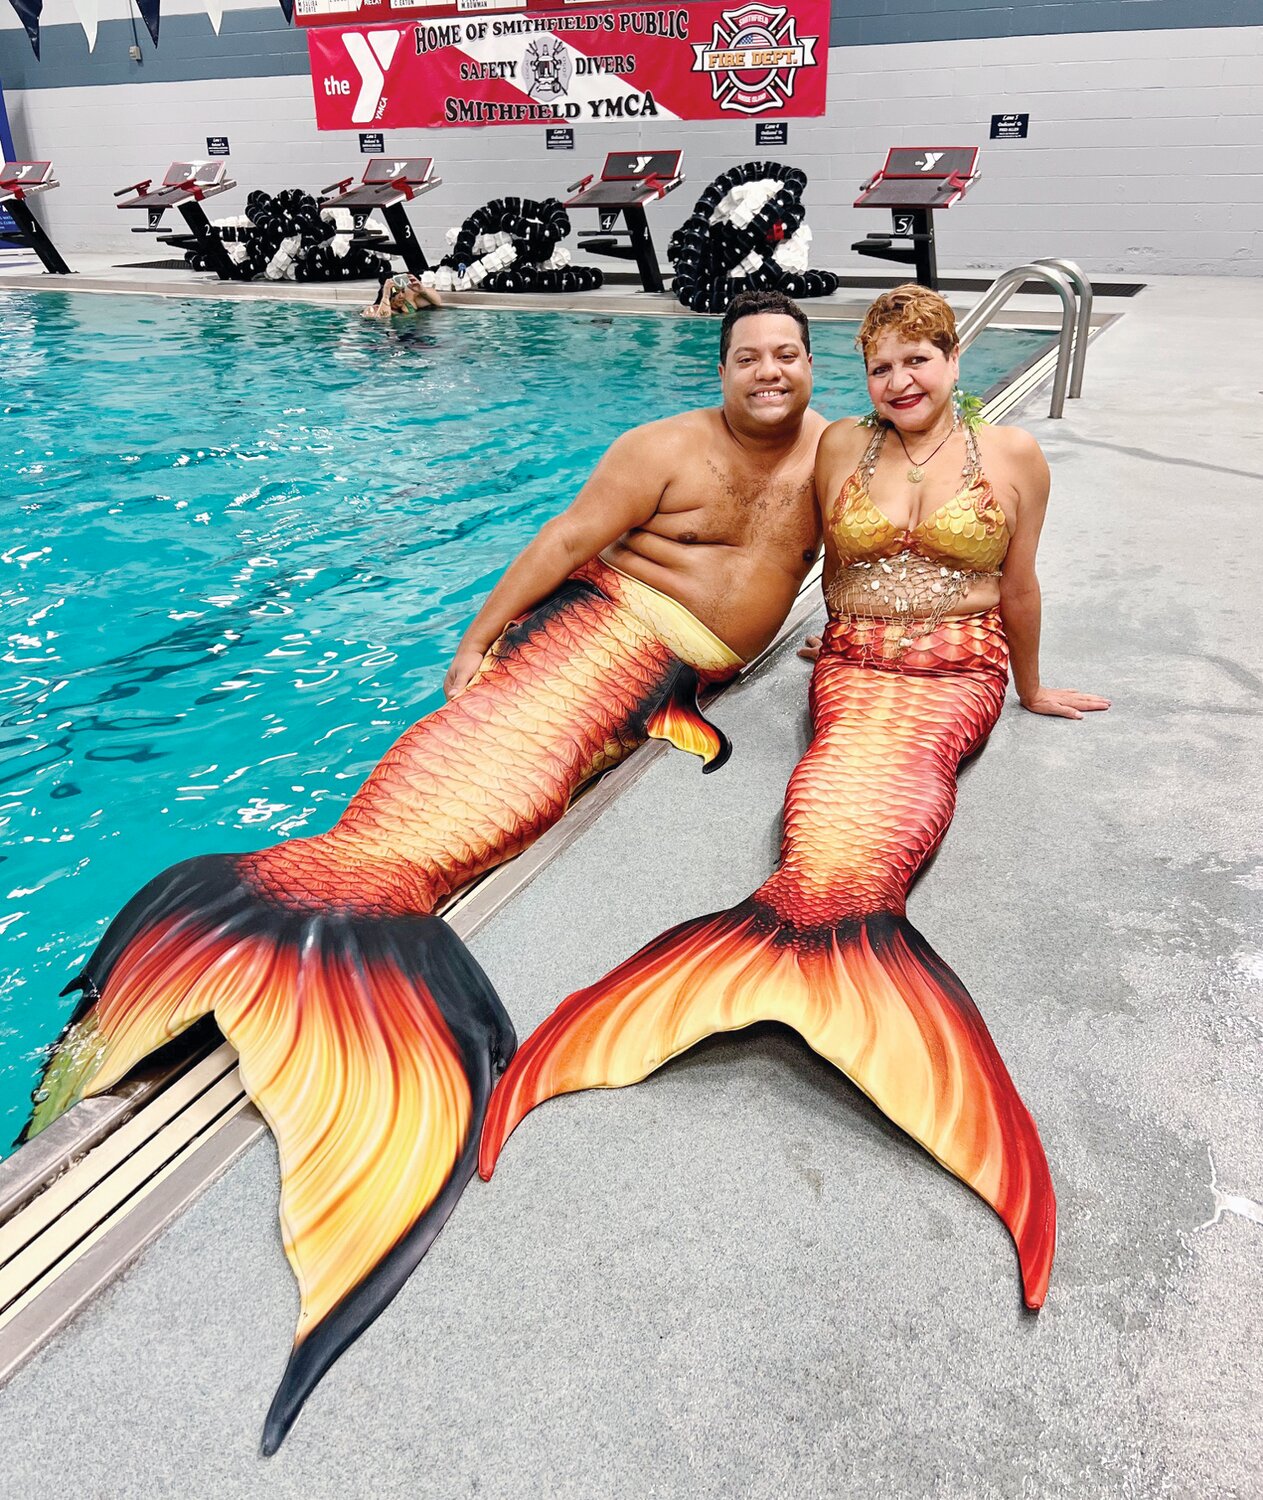 POOL SIDE MERFOLK: Erin Walsh provided this collection of photos from meetings of Ocean State Merfolk.